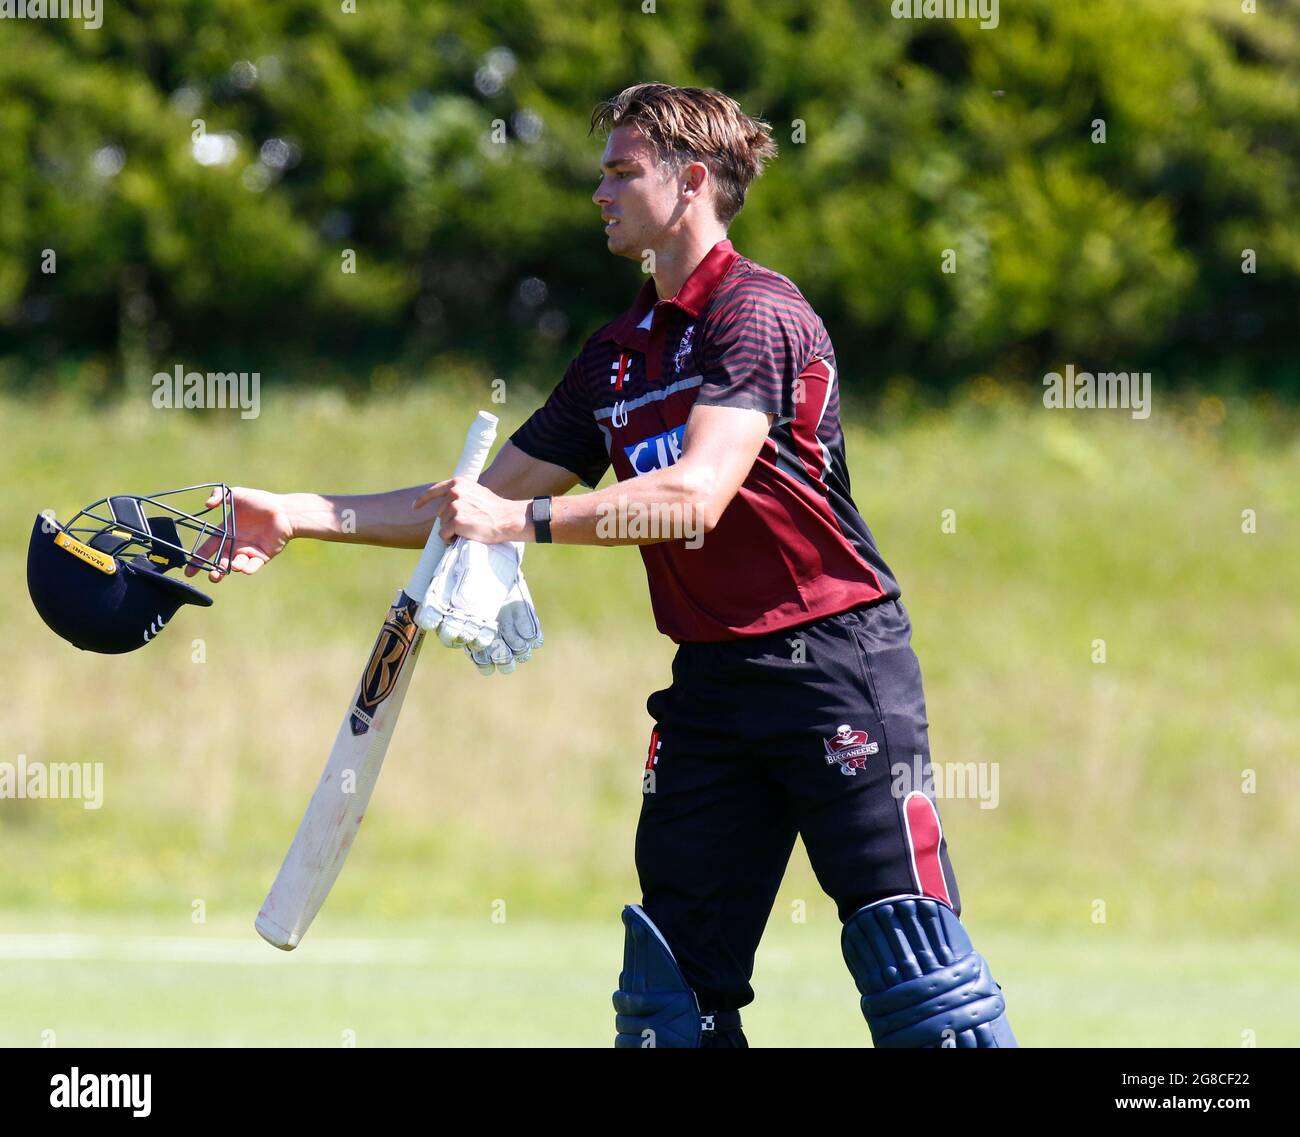 BILLERICAY, United Kingdom, JULY 18: Christopher Green of Brentwood cc and Middlesexduring Dukes Essex T20 Competition - Final between Wanstead and Sn Stock Photo